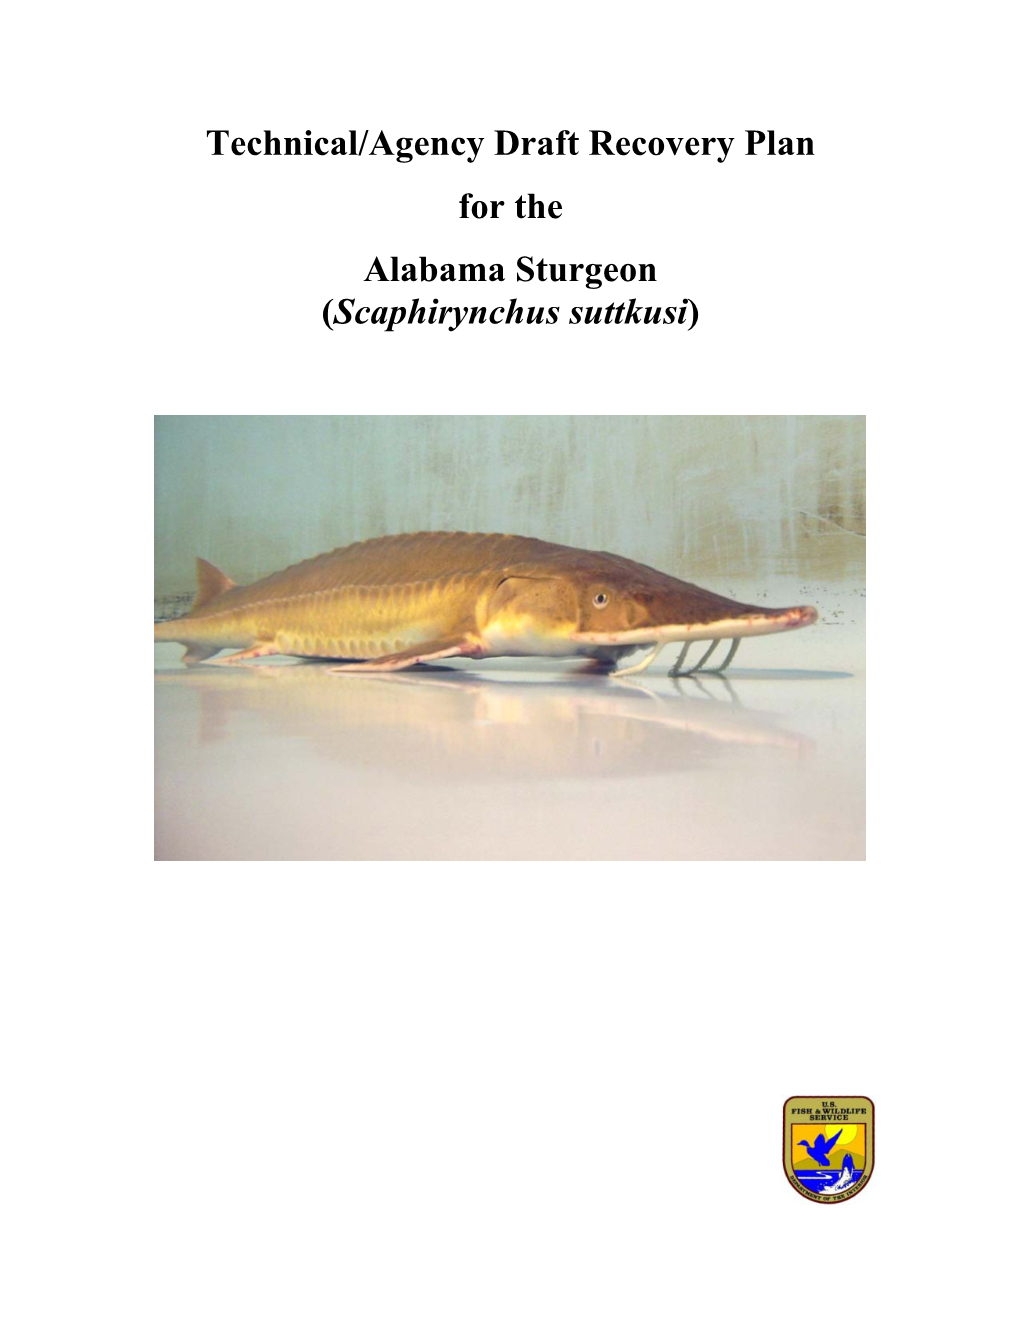 Technical/Agency Draft Recovery Plan for the Alabama Sturgeon (Scaphirynchus Suttkusi)